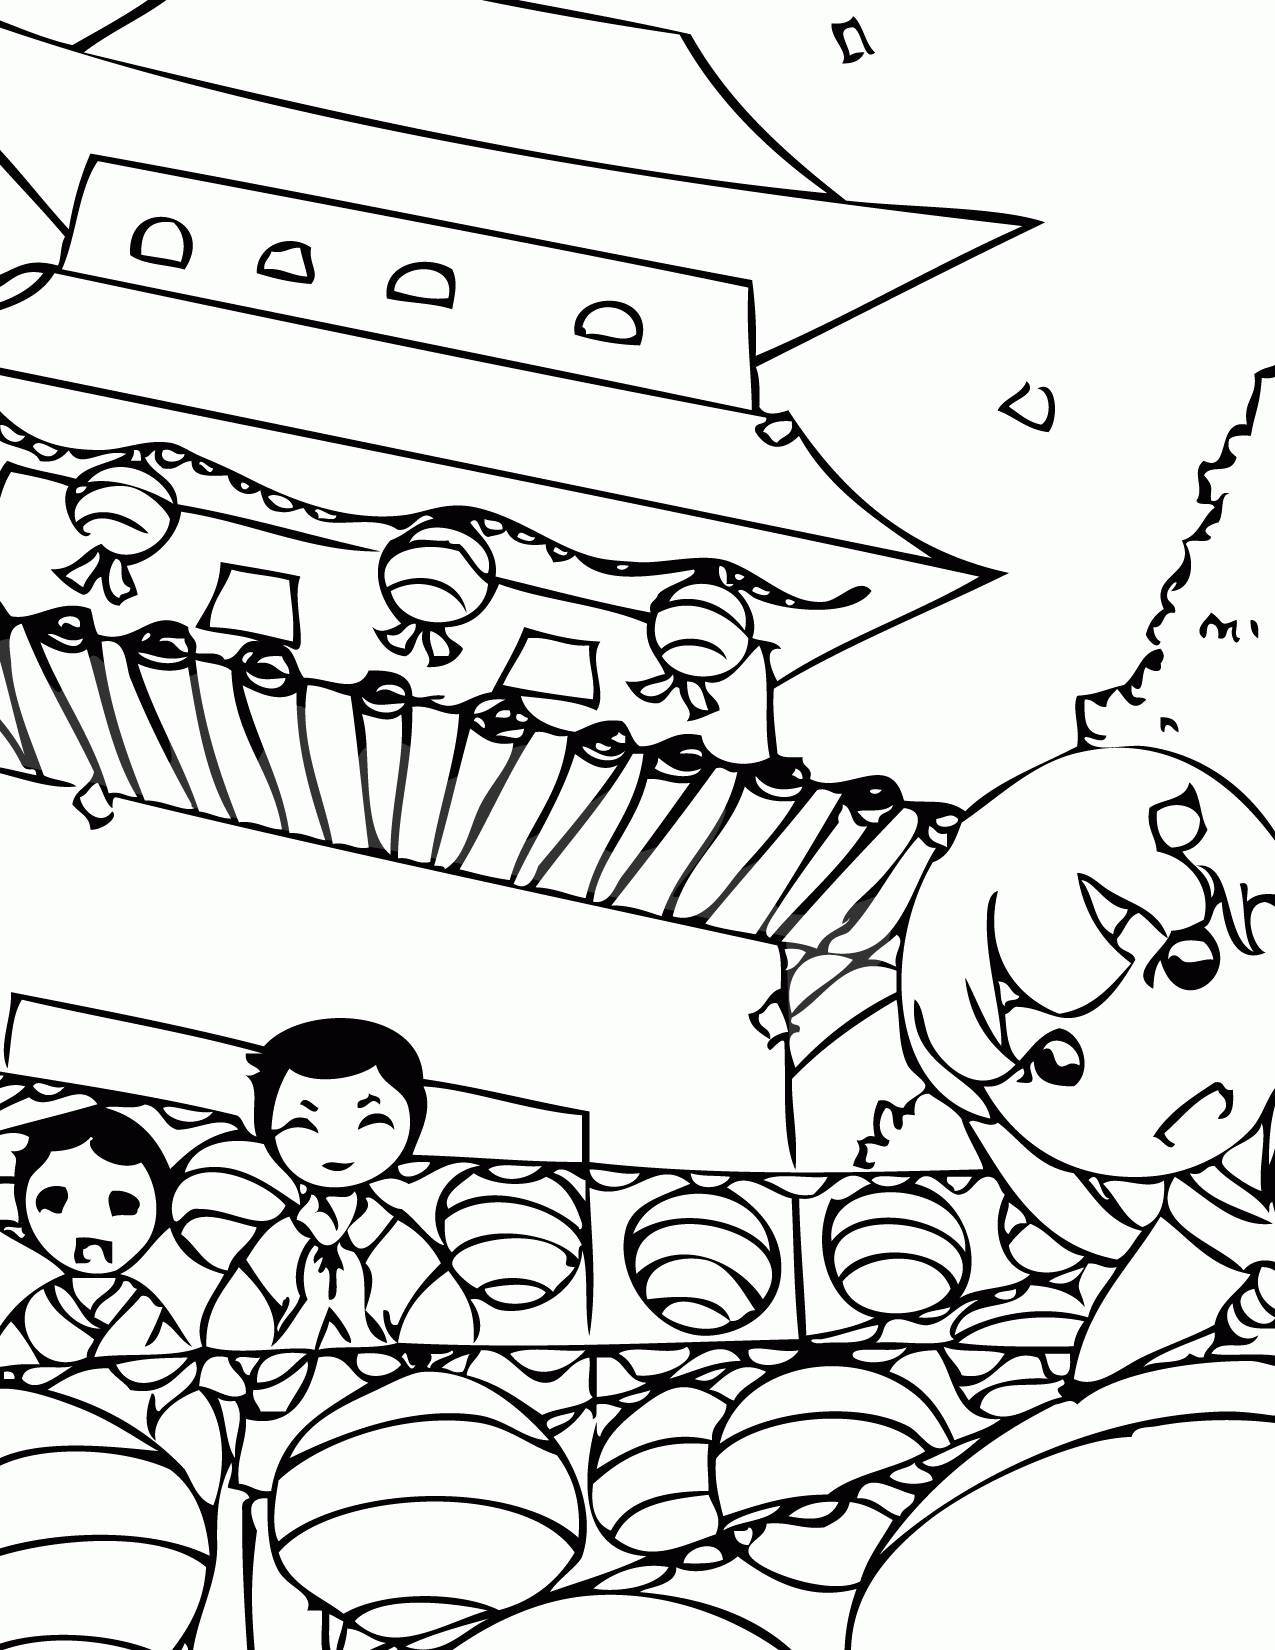 Buddha's Birthday Coloring Page - Handipoints